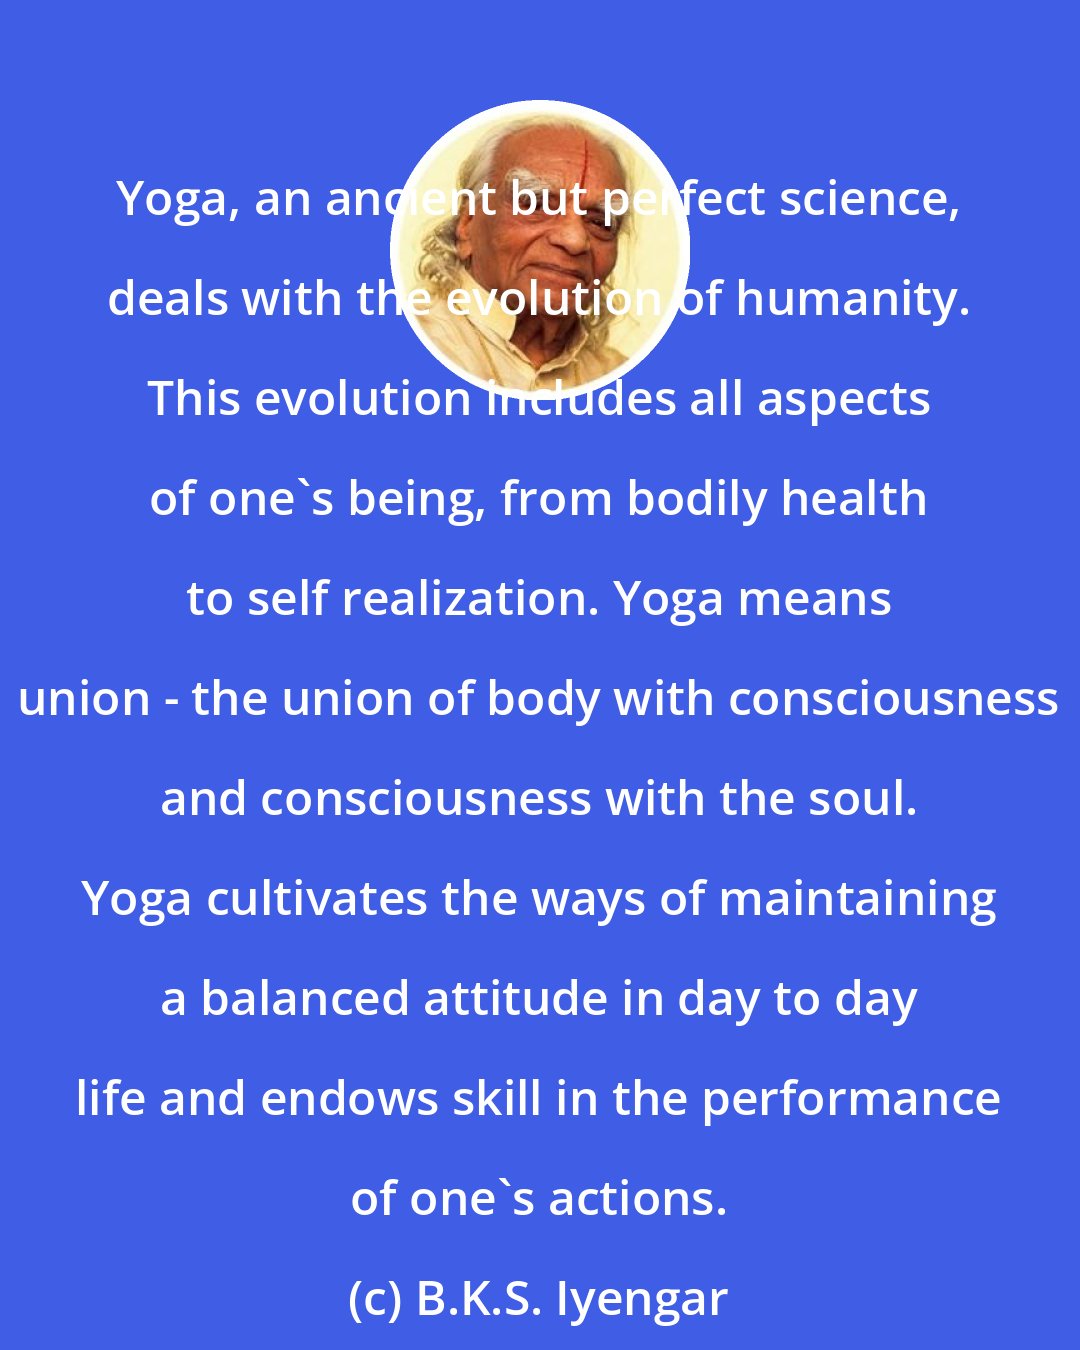 B.K.S. Iyengar: Yoga, an ancient but perfect science, deals with the evolution of humanity. This evolution includes all aspects of one's being, from bodily health to self realization. Yoga means union - the union of body with consciousness and consciousness with the soul. Yoga cultivates the ways of maintaining a balanced attitude in day to day life and endows skill in the performance of one's actions.